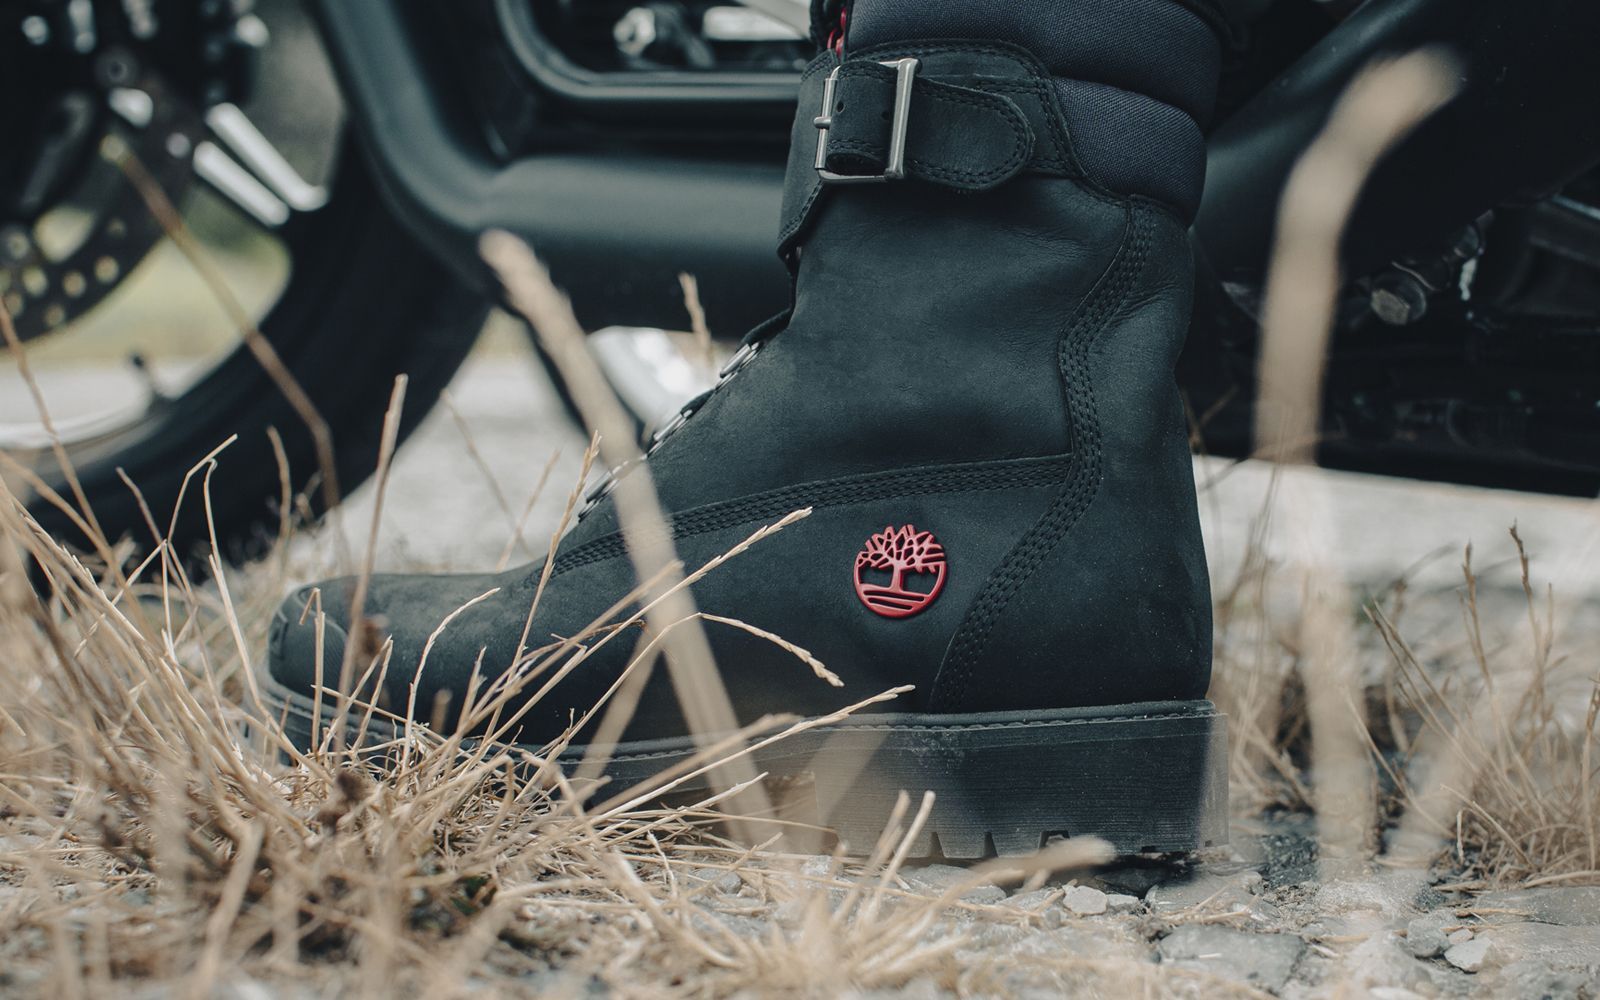 Timberland and Moto Guzzi together for a capsule collection To celebrate the 100th anniversary of the Italian company